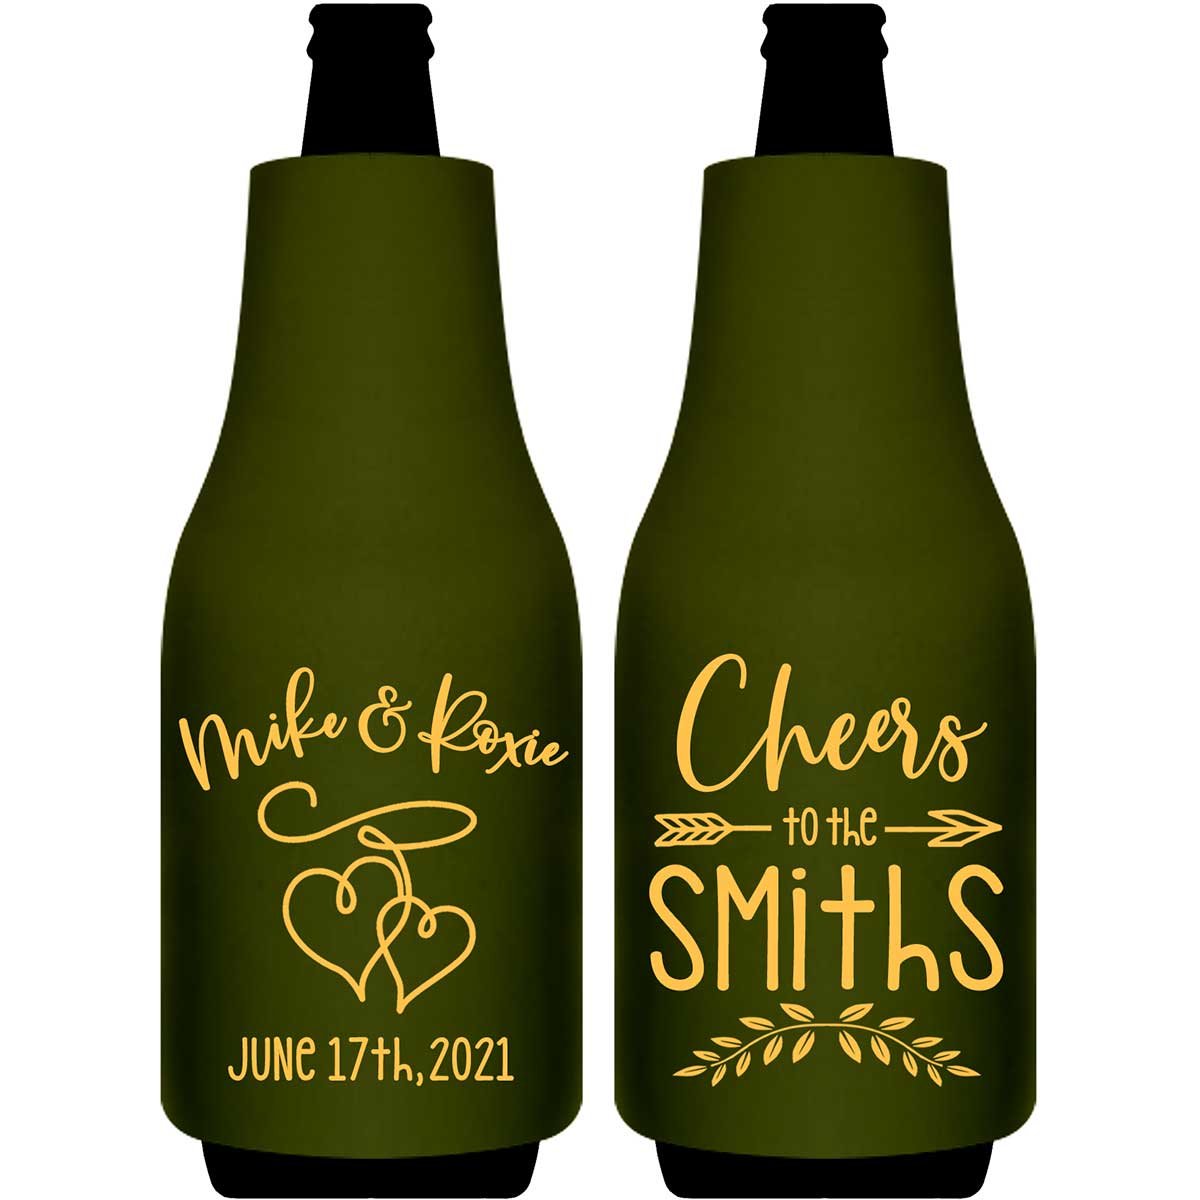 Intertwined Hearts 4A Cheers Foldable Bottle Sleeve Koozies Wedding Gifts for Guests